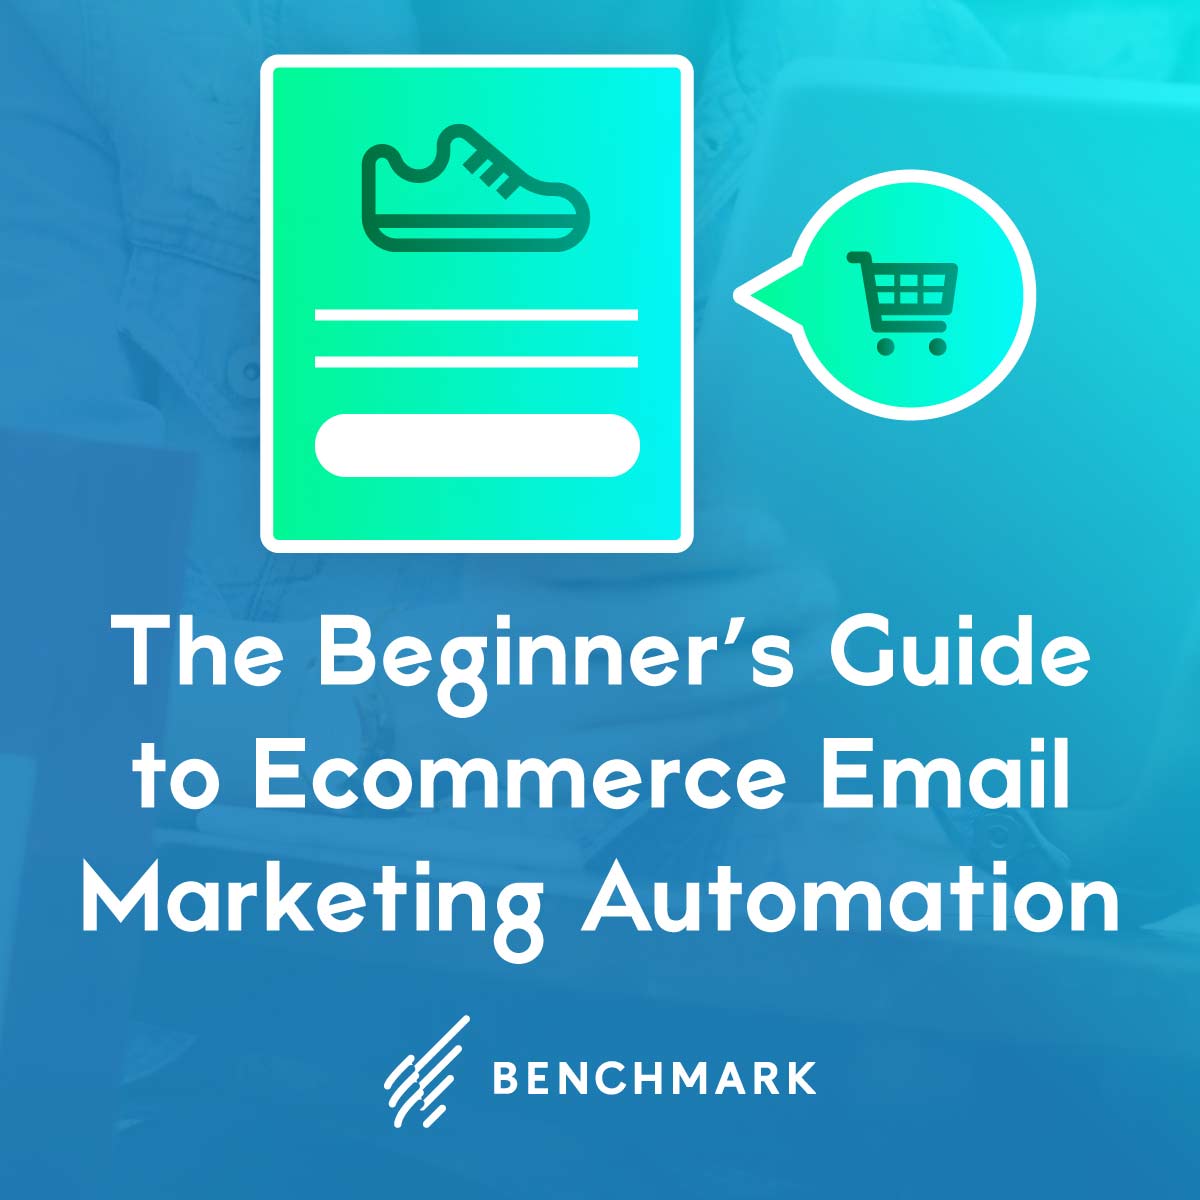 The Beginner’s Guide to Ecommerce Email Marketing Automation